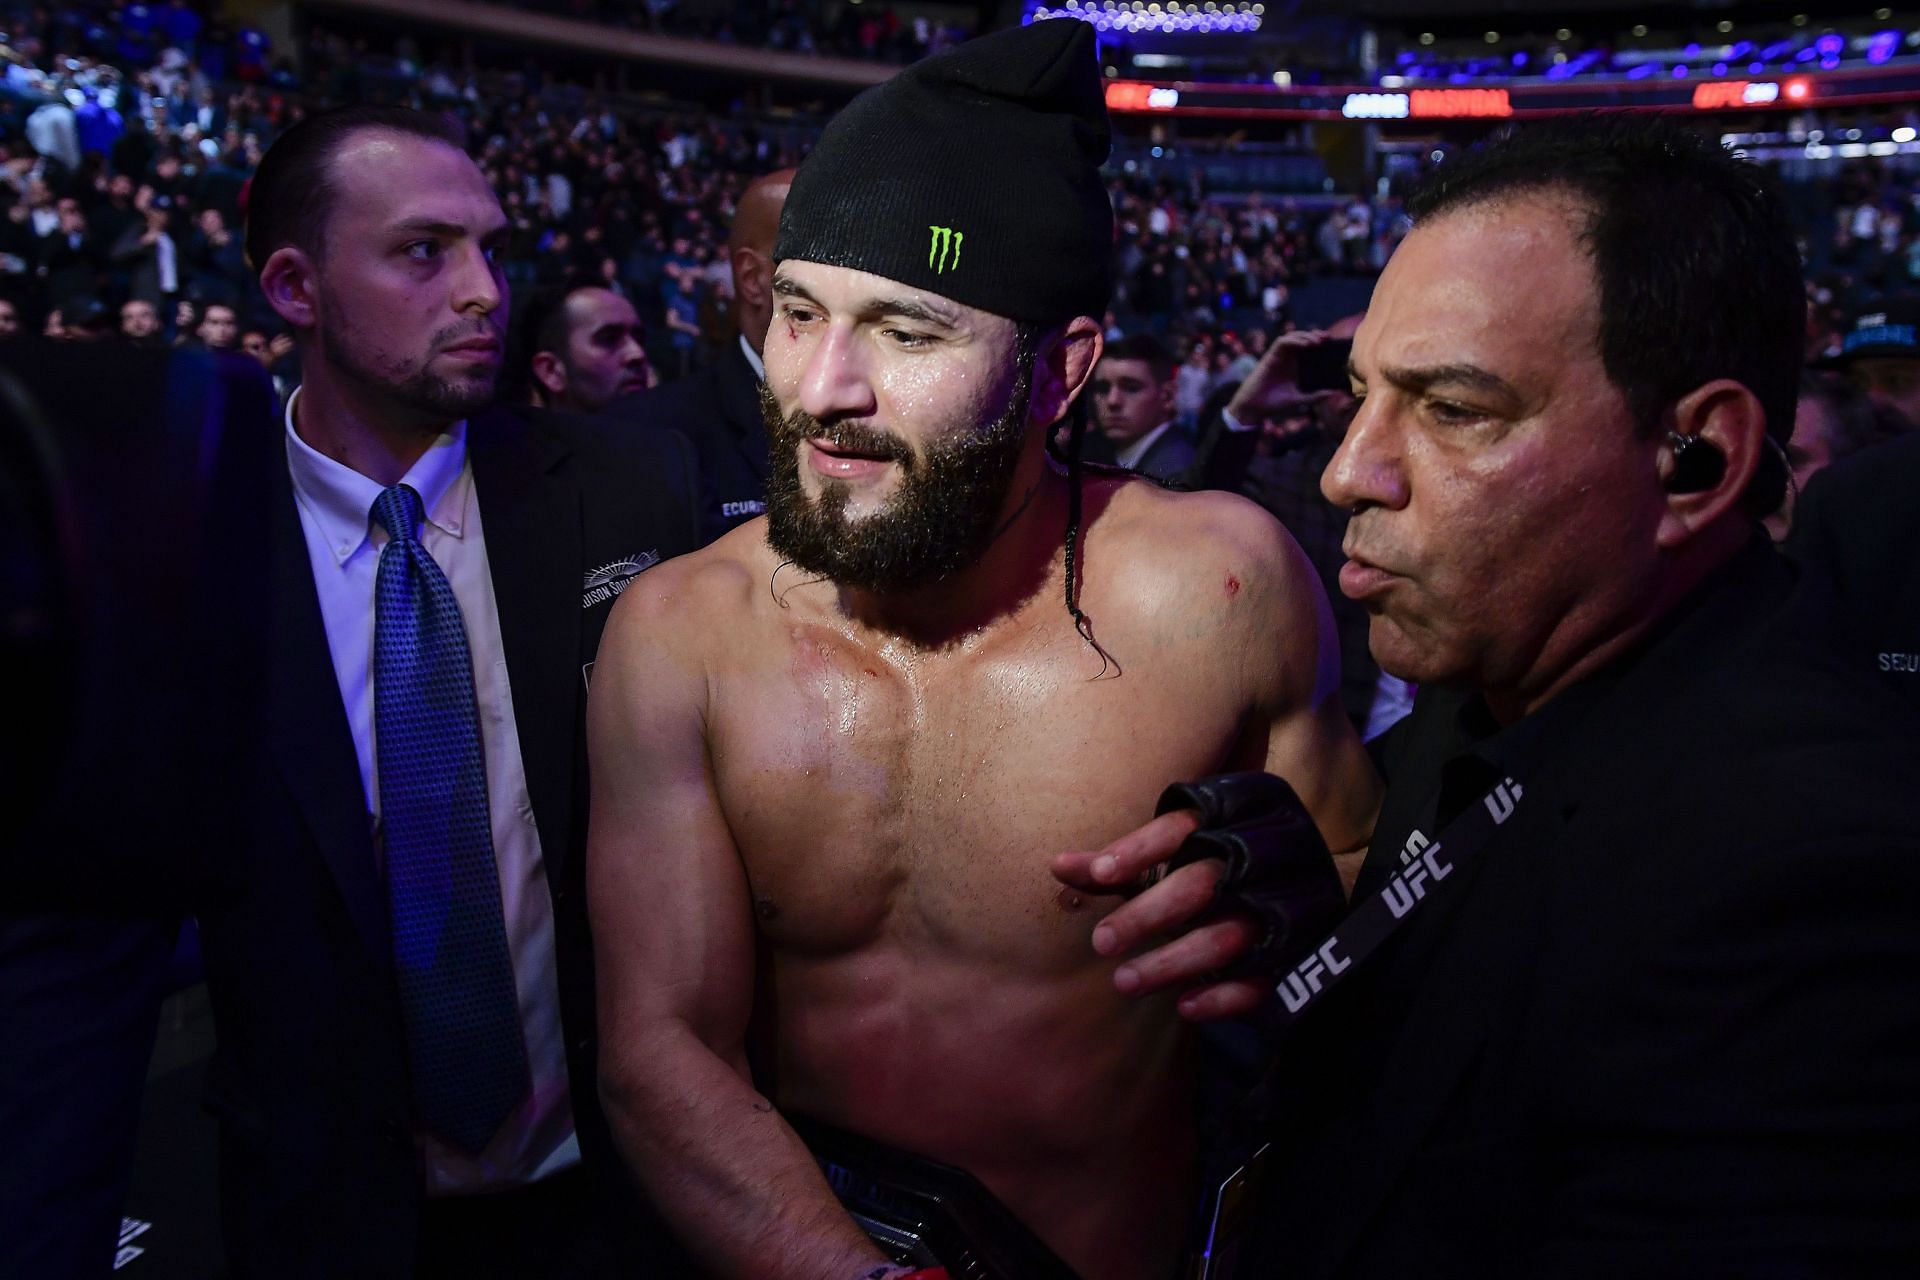 Jorge Masvidal&#039;s &#039;BMF&#039; image only really works when he&#039;s winning fights